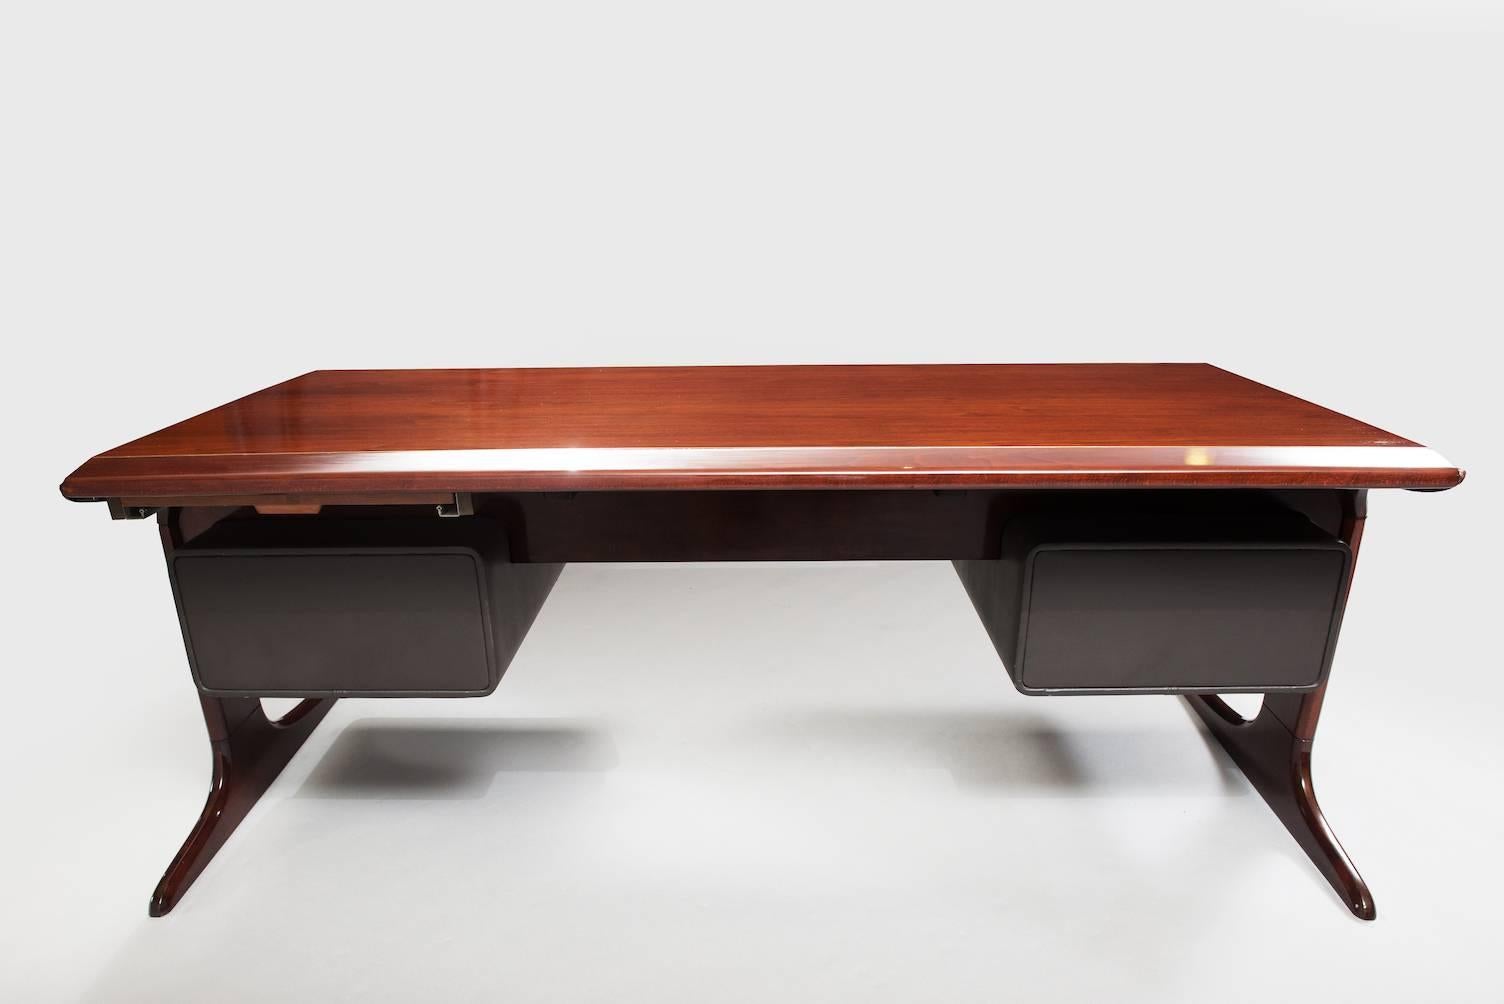 Walnut desk with two blocks upholstered in brown ecological skin, each one with two drawers.